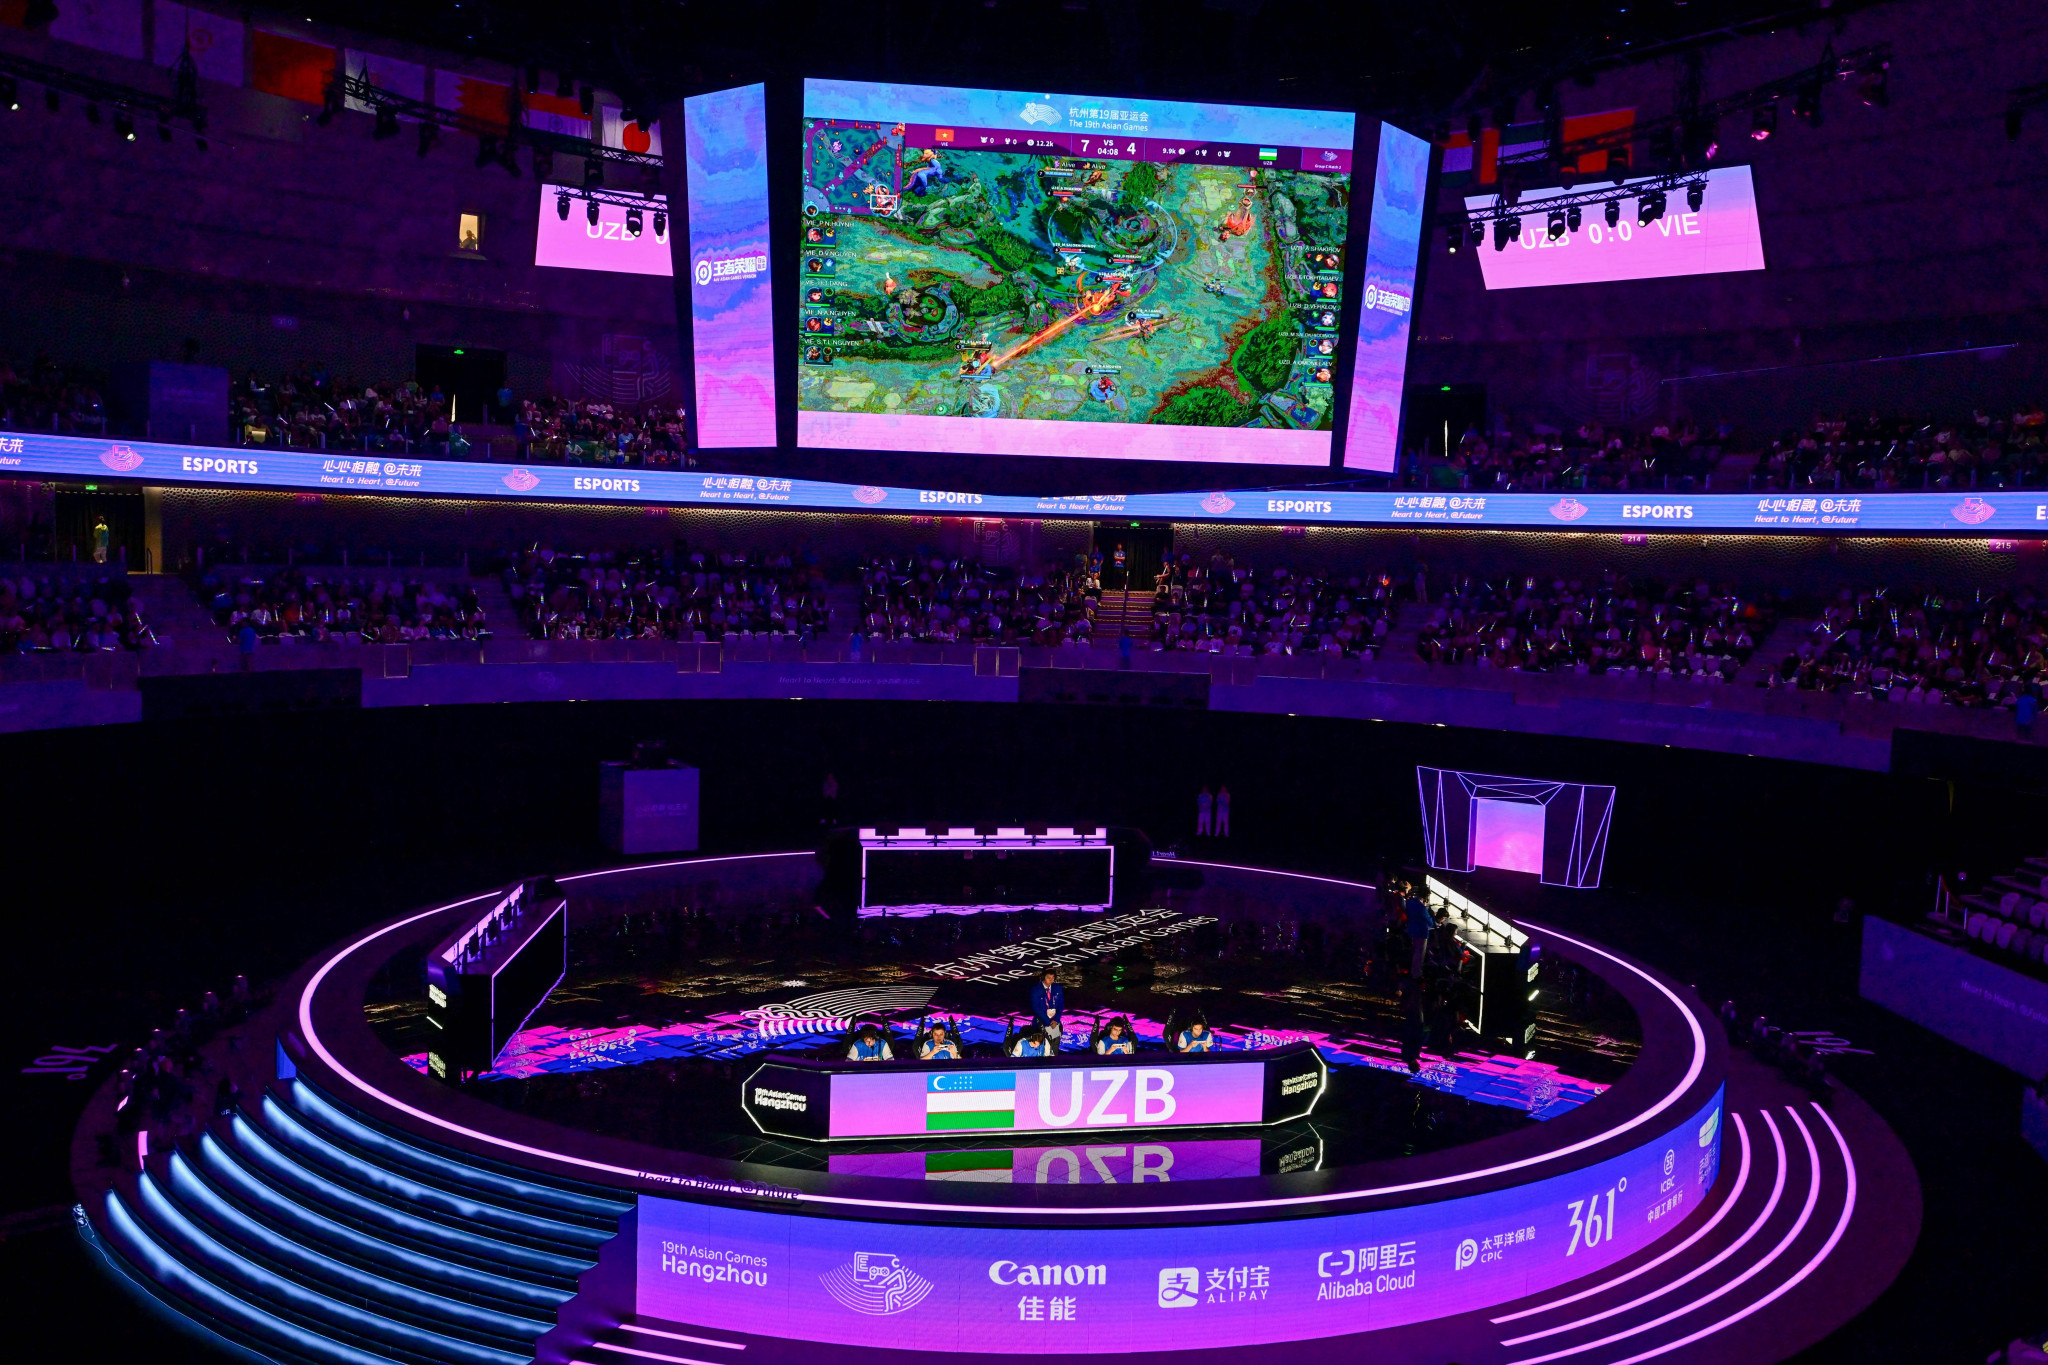 Esports has begun at Hangzhou 2022 where it is debuting as an official medal event ©Getty Images